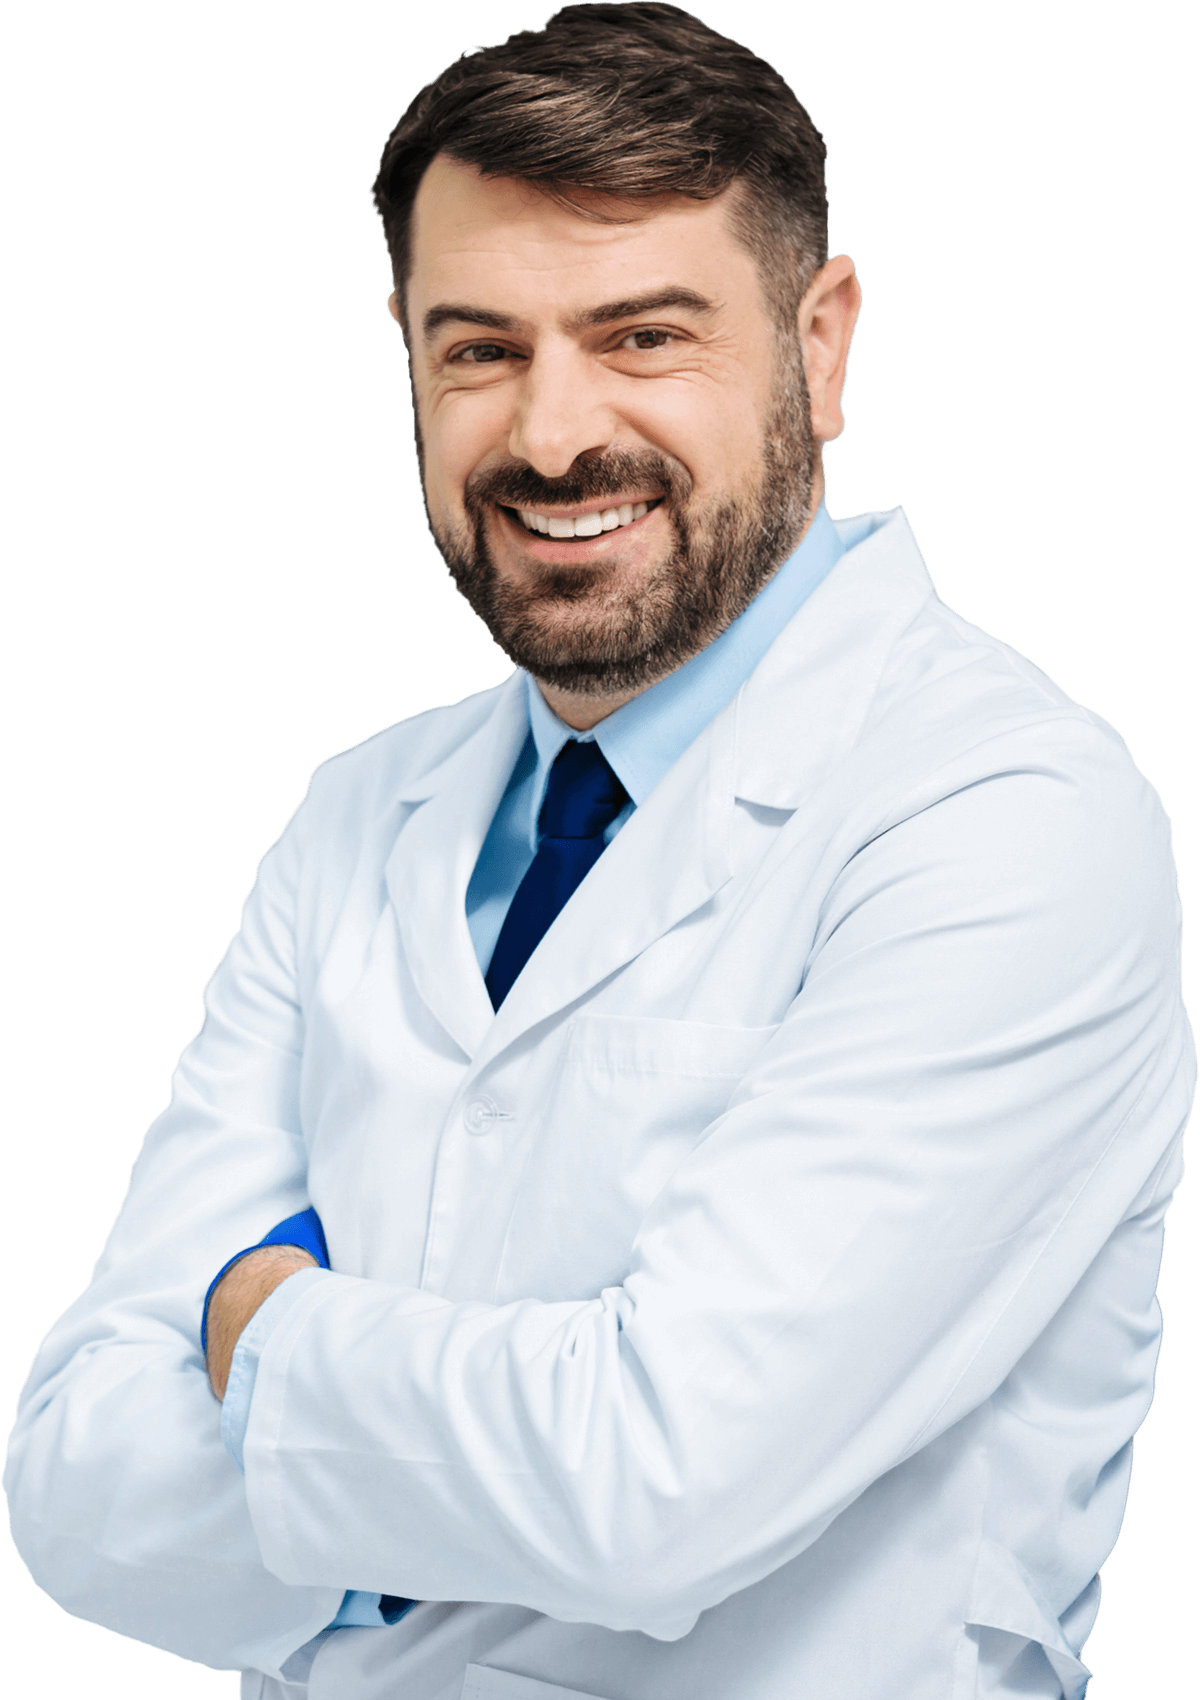 https://hasmetbardakci.com/wp-content/uploads/2020/02/doctor-2.png